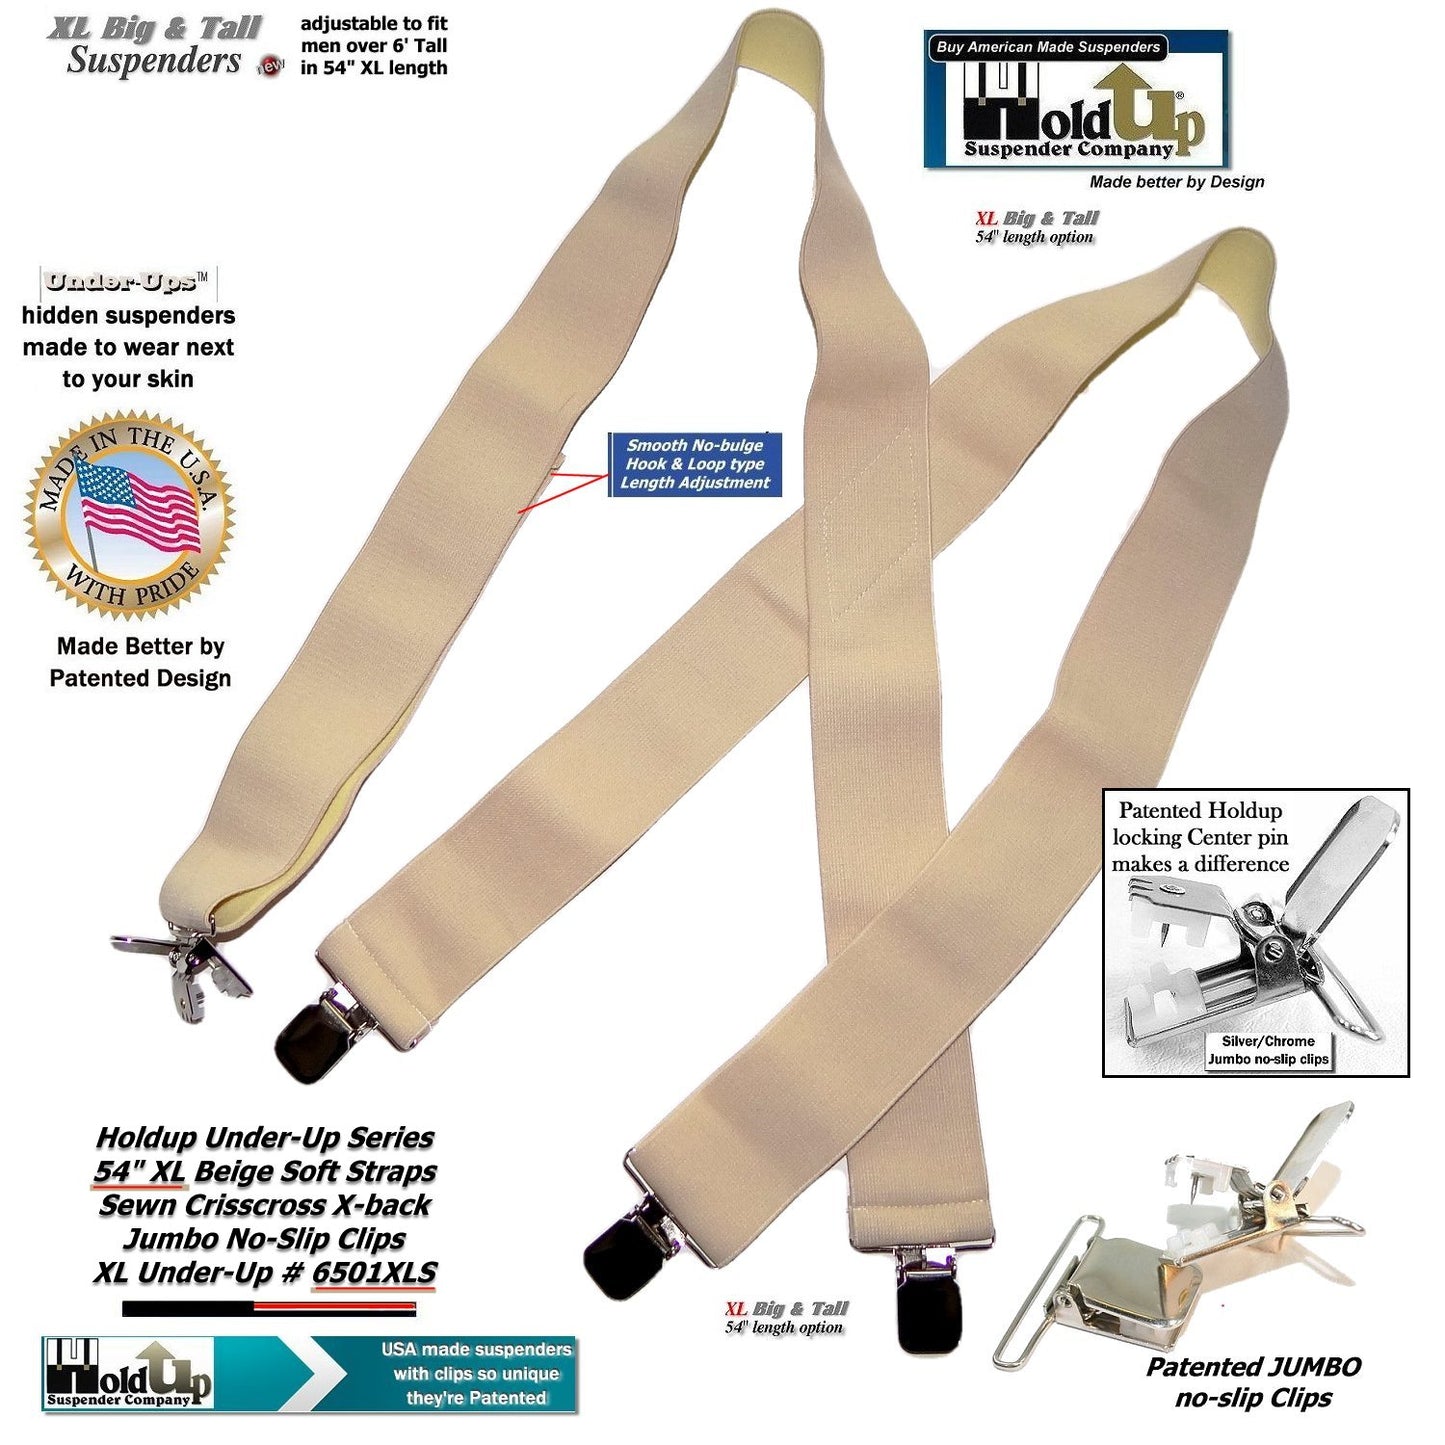 HoldUp beige Undergarment XL Hidden X-back Suspenders with Patented Silver No-slip Clips